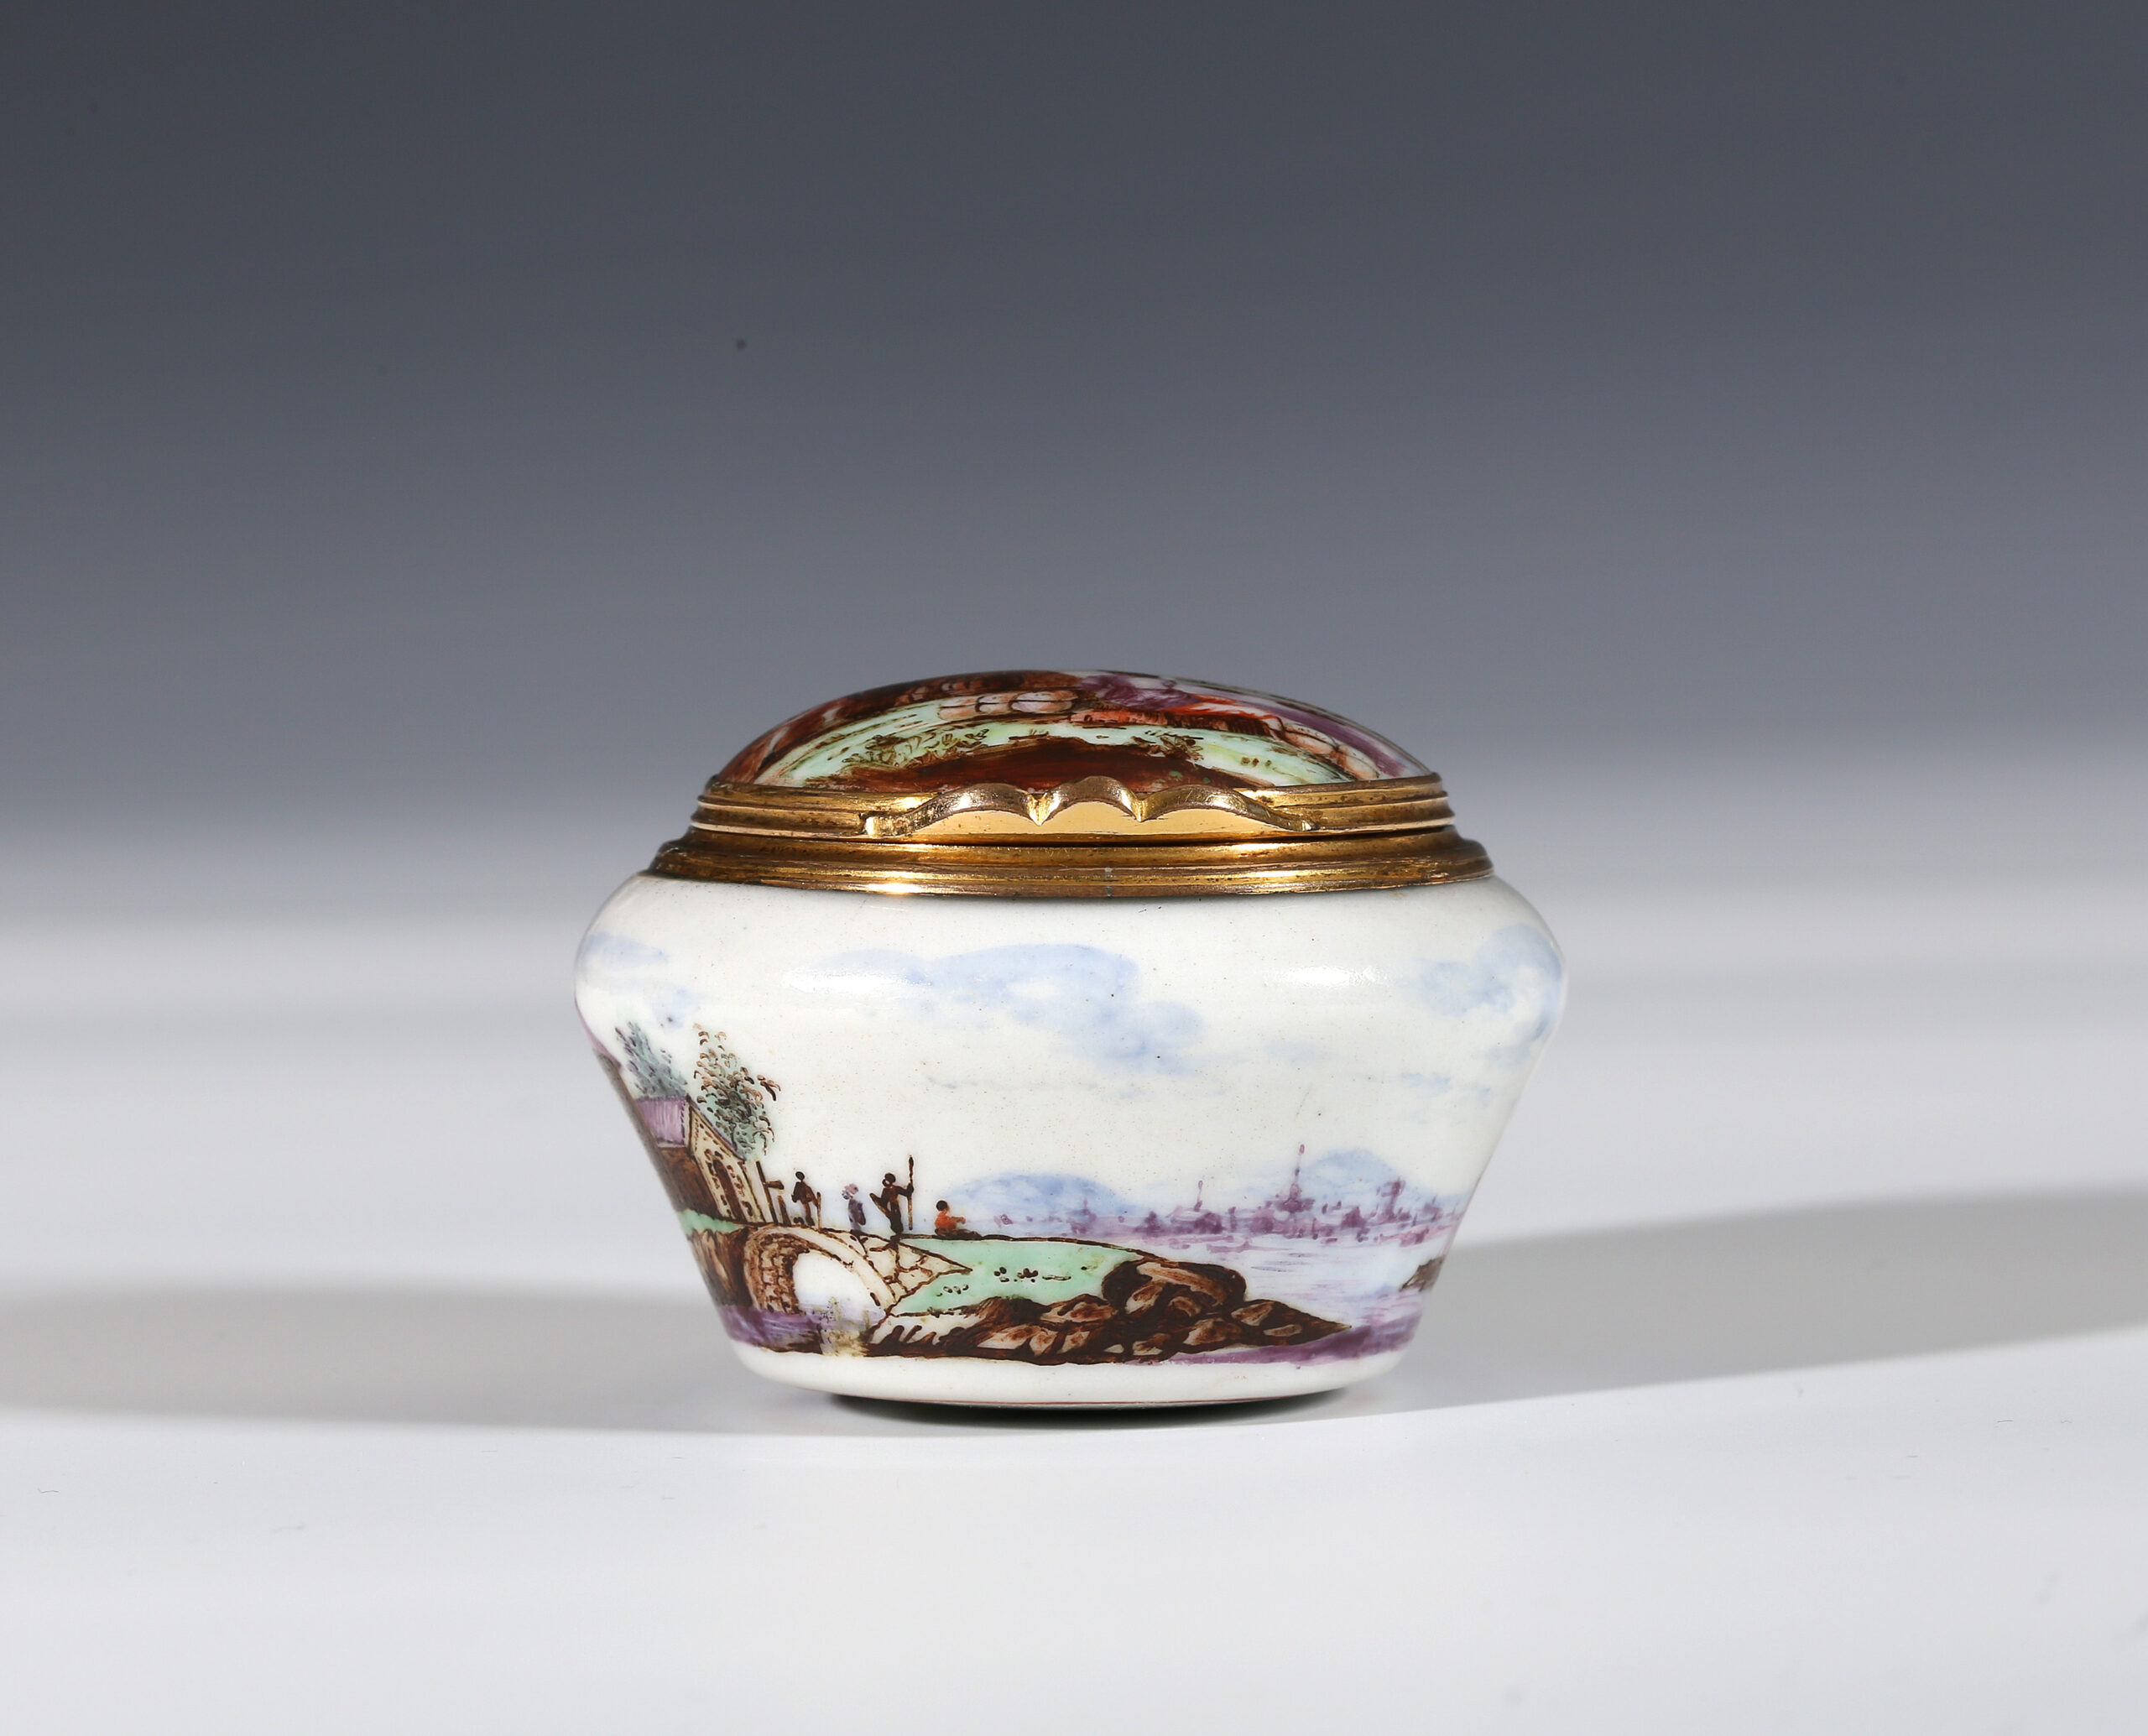 AN ‘A’-MARKED PORCELAIN GILT-METAL MOUNTED SNUFF BOX